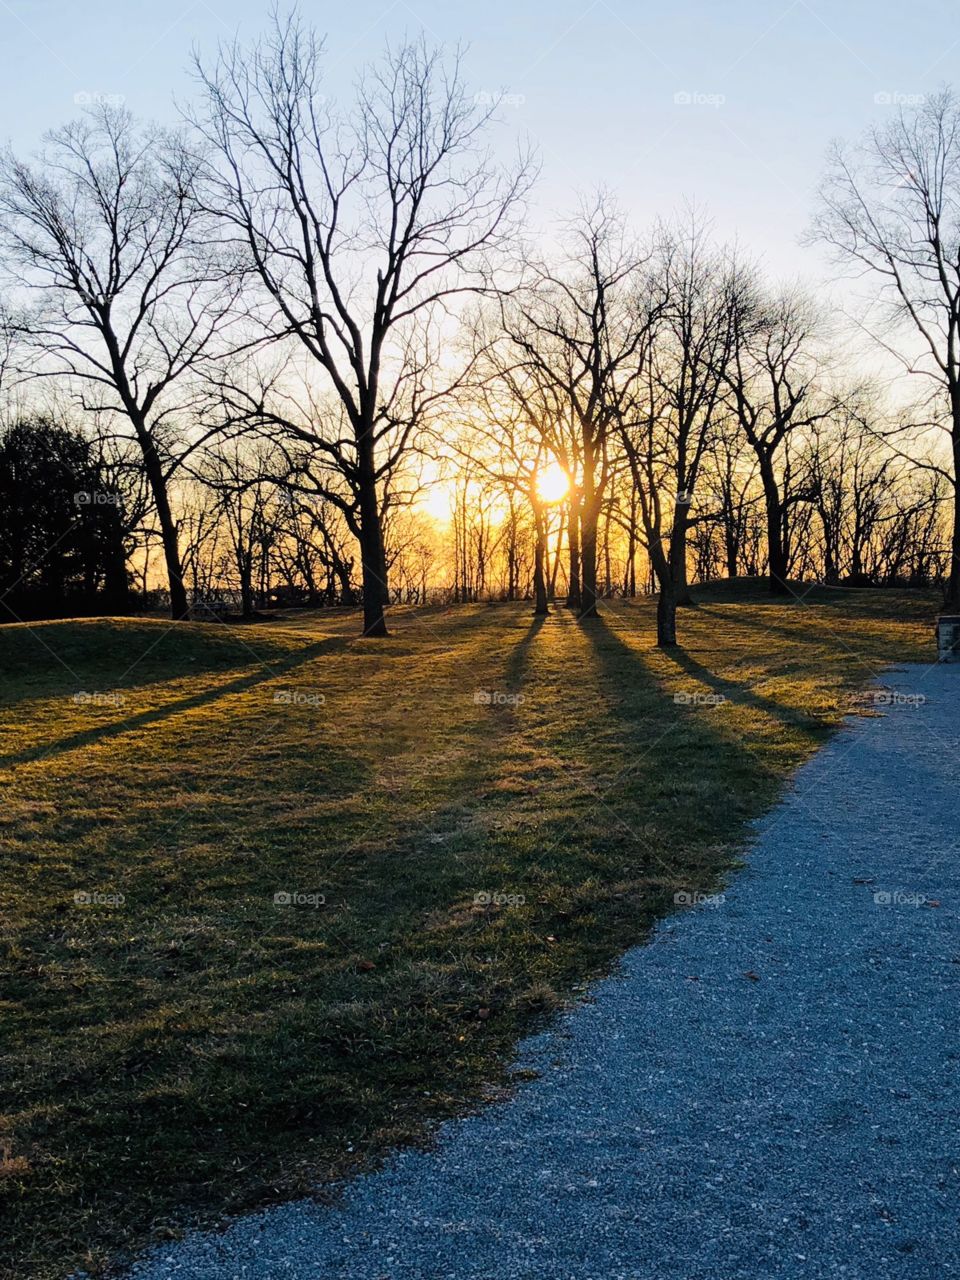 Sunset at Wright-Patterson Memorial Park.